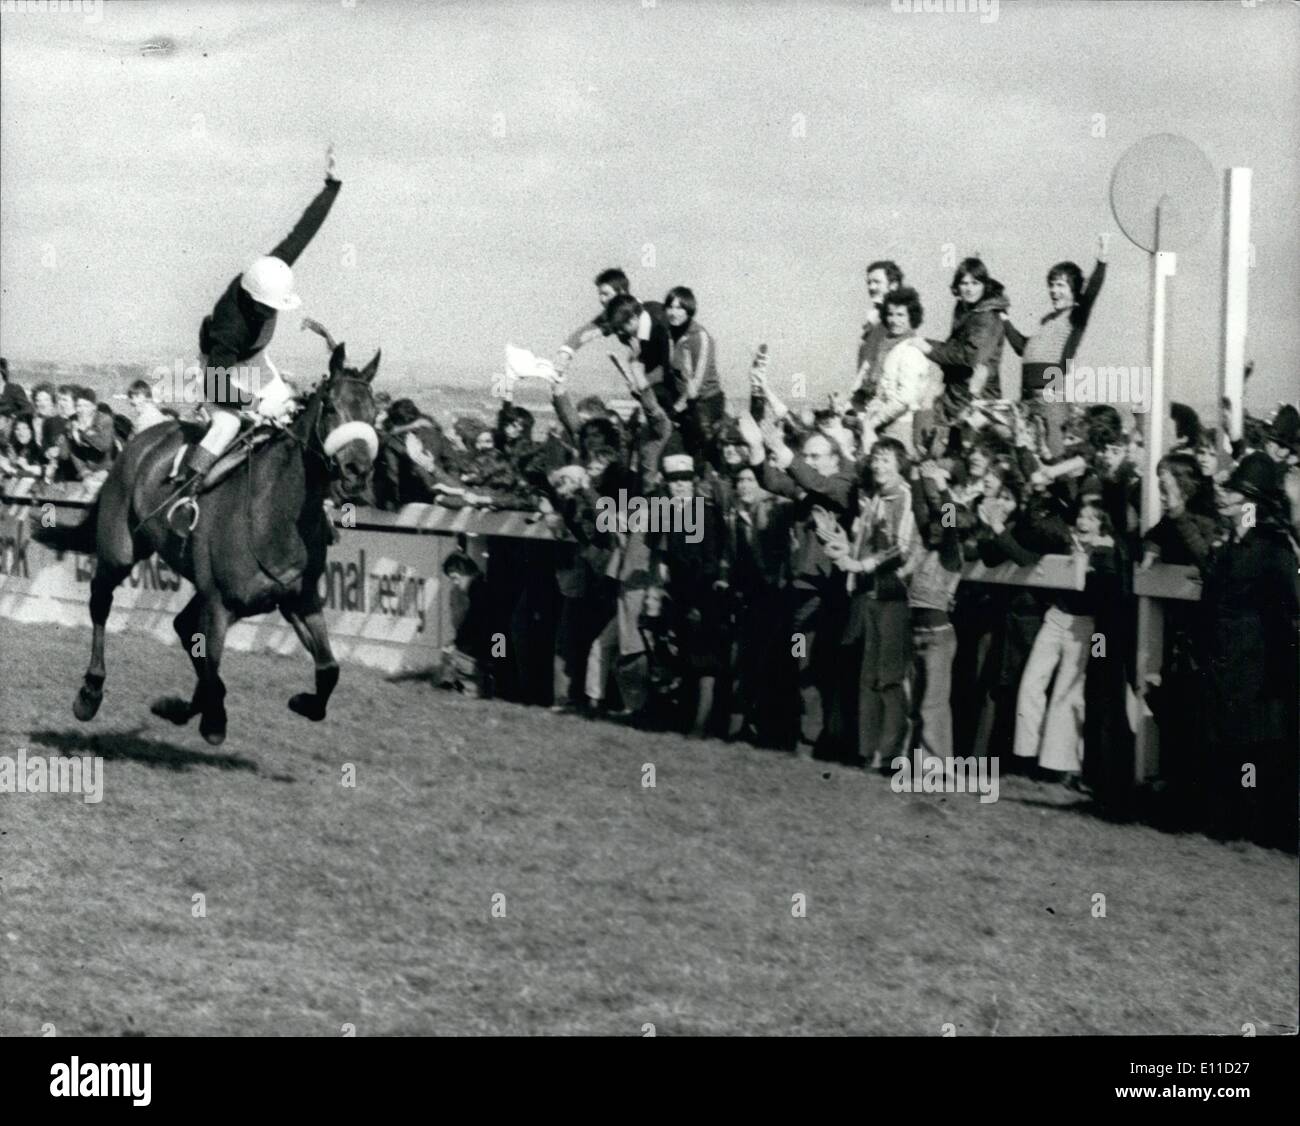 Apr. 04, 1977 - Red Rum Makes Racing History By Winning His Third Grand National At Aintree: Red Rum made racing history today by winning his third national at Aintree he as also finished second twice. Photo shows. there is no mistaking jockey Tommy Sack's jubilation as Red Rum goes past the winning post to win his third Grand National. Stock Photo